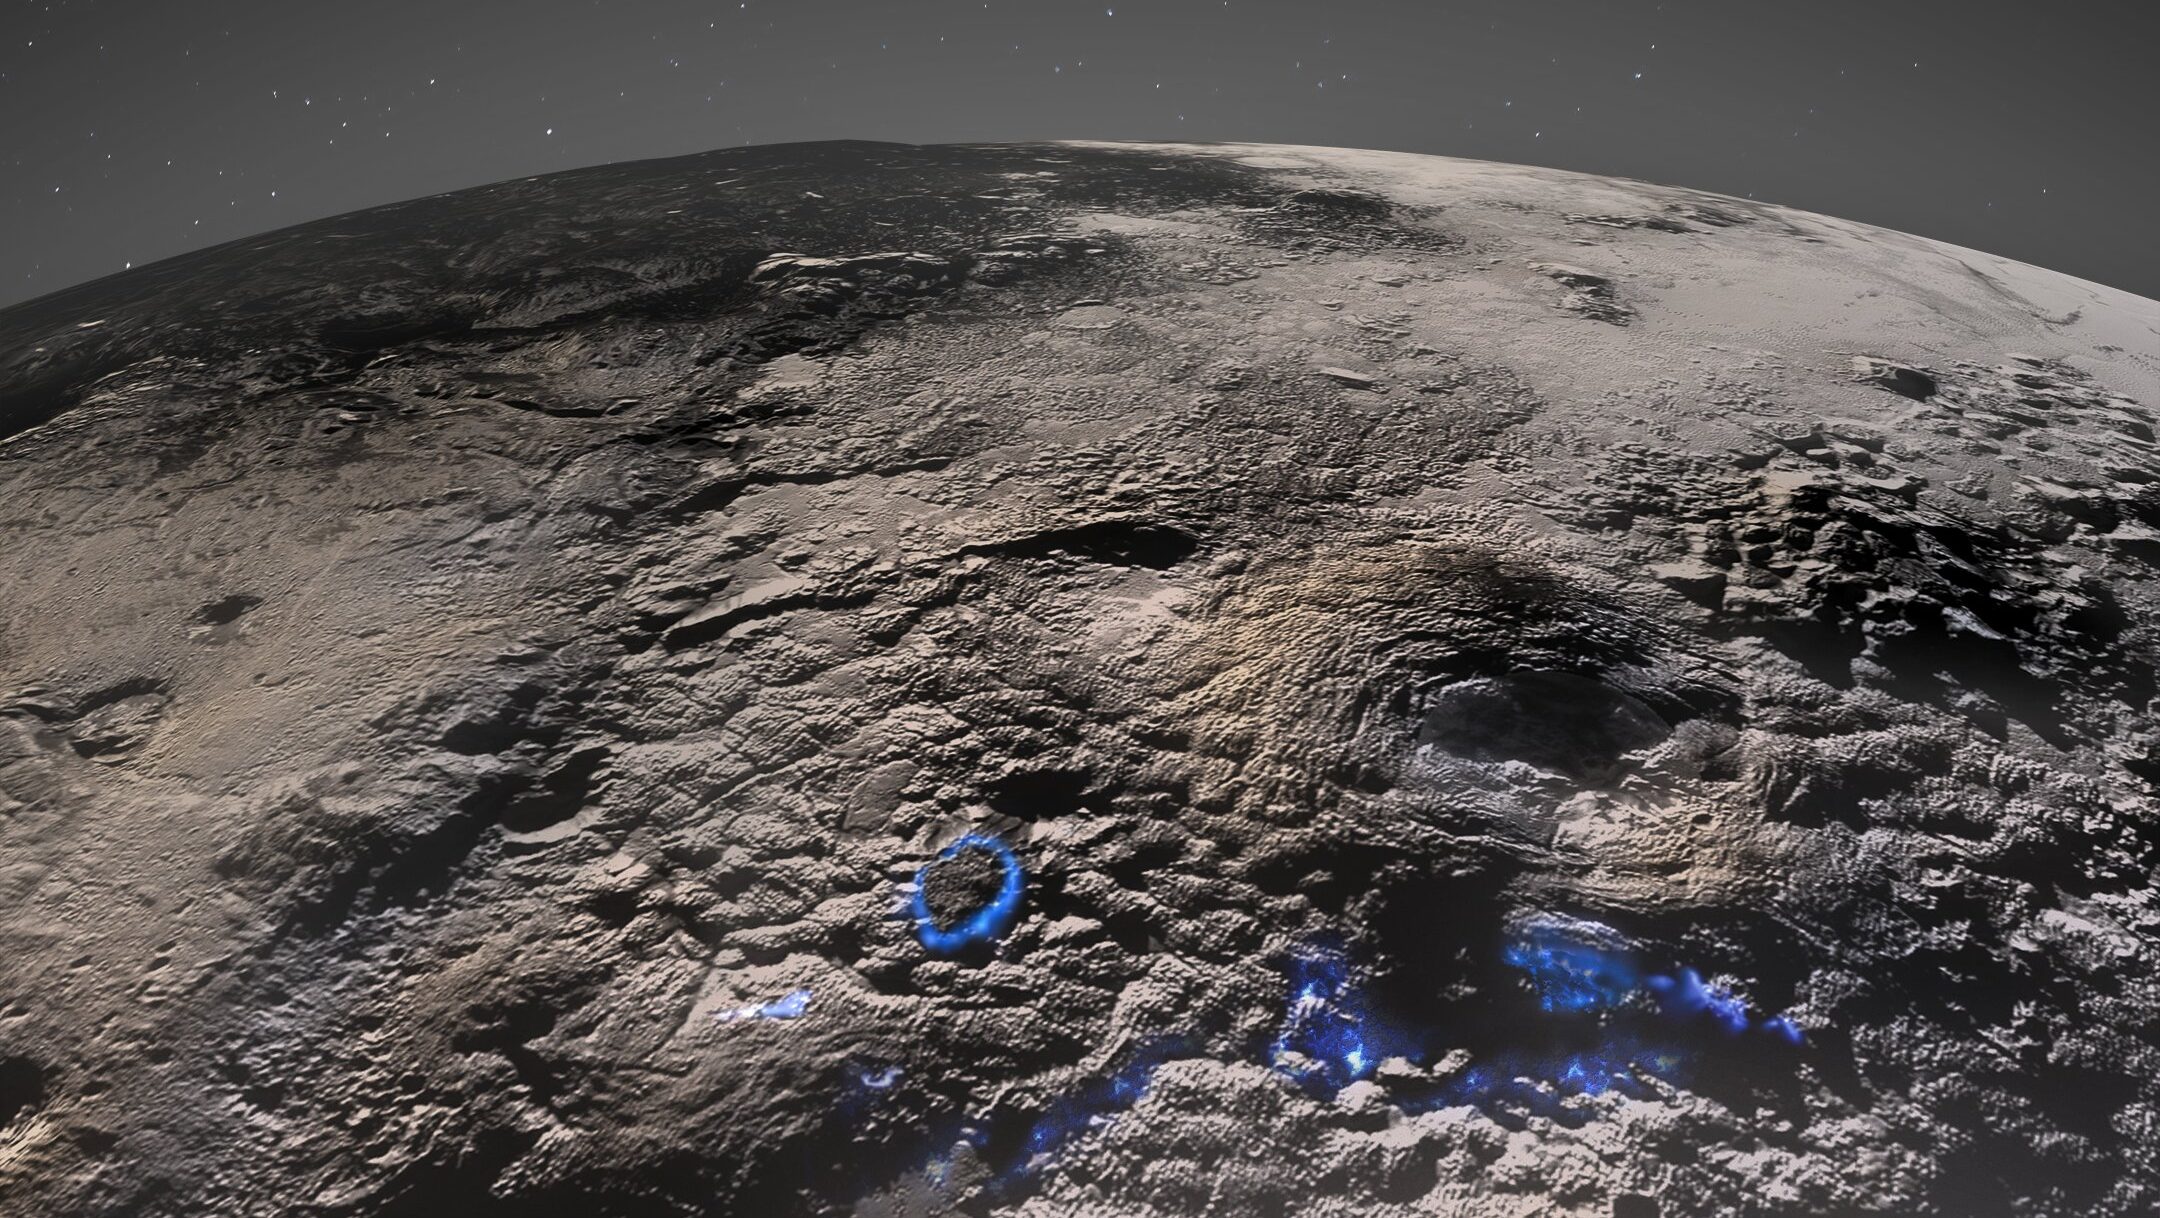 Ice volcanoes on Pluto might still be active. Credit: NASA/Johns Hopkins University Applied Physics Laboratory/Southwest Research Institute/Isaac Herrera/Kelsi Singer